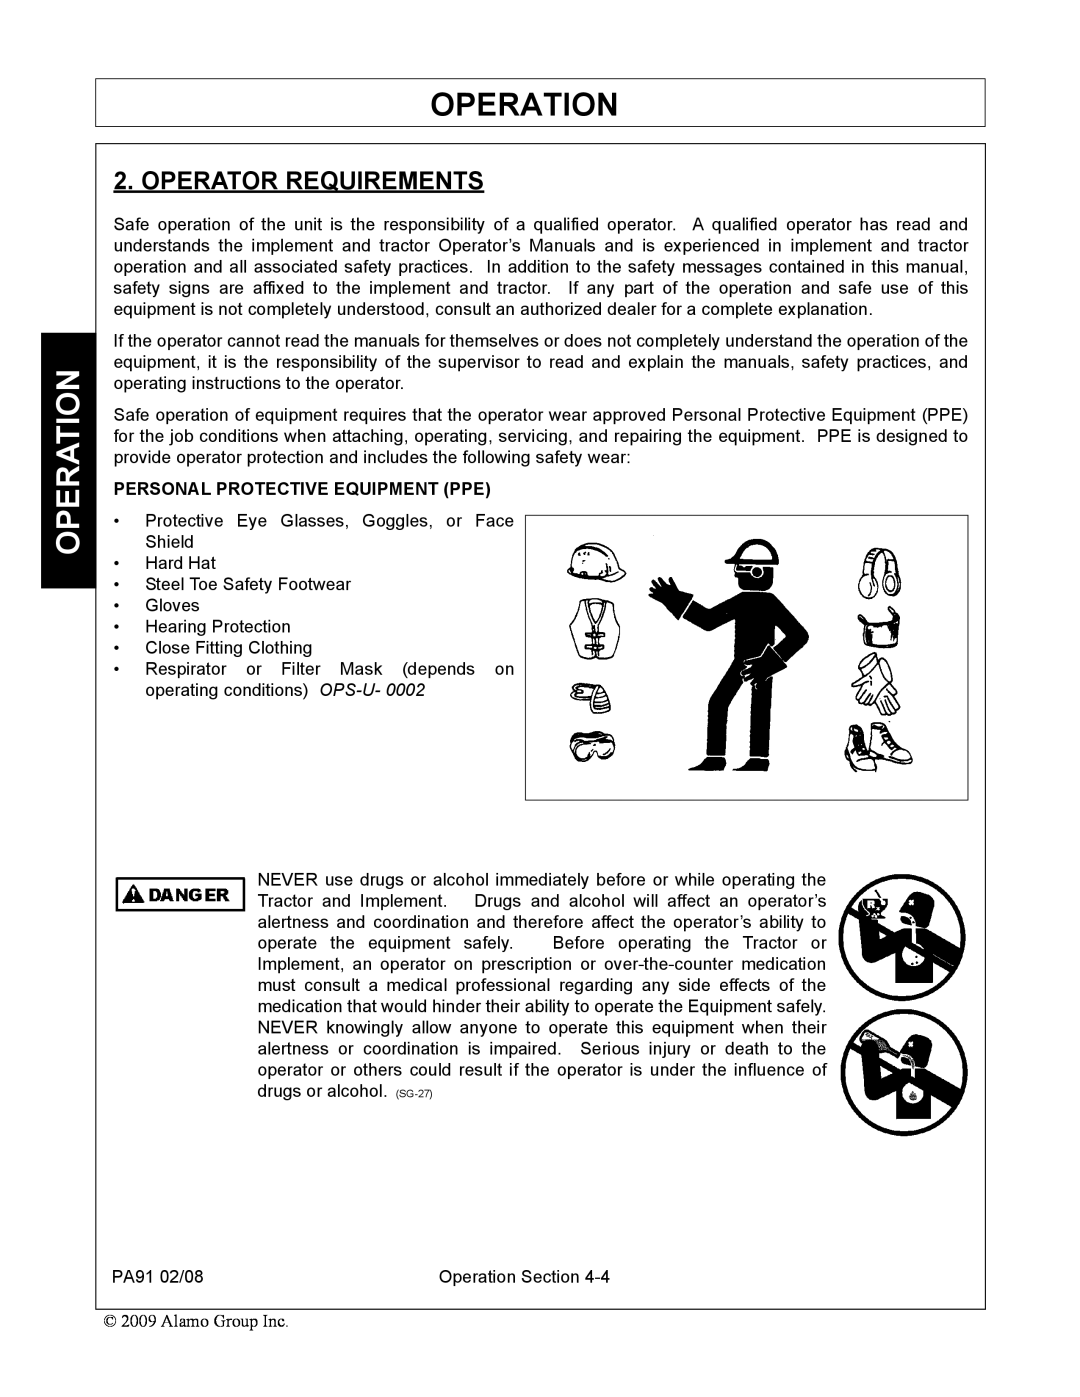 Alamo 7191852C manual Operator Requirements, Operation, Personal Protective Equipment Ppe 